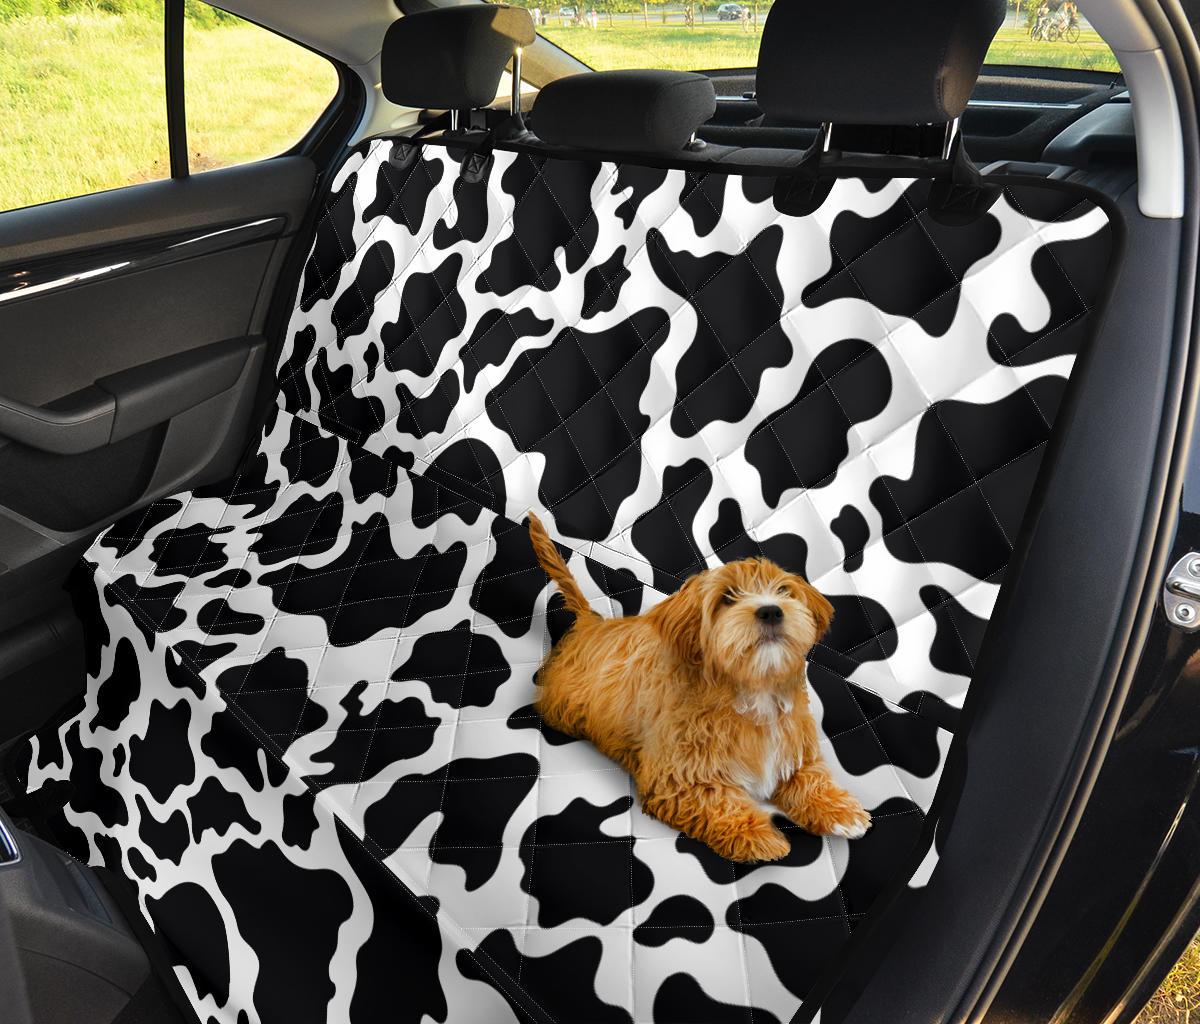 Pet Seat Cover - Cow Print Pet Seat Cover / X-Large (Full-Size Trucks / Oversized SUVs) Official COW PRINT Merch